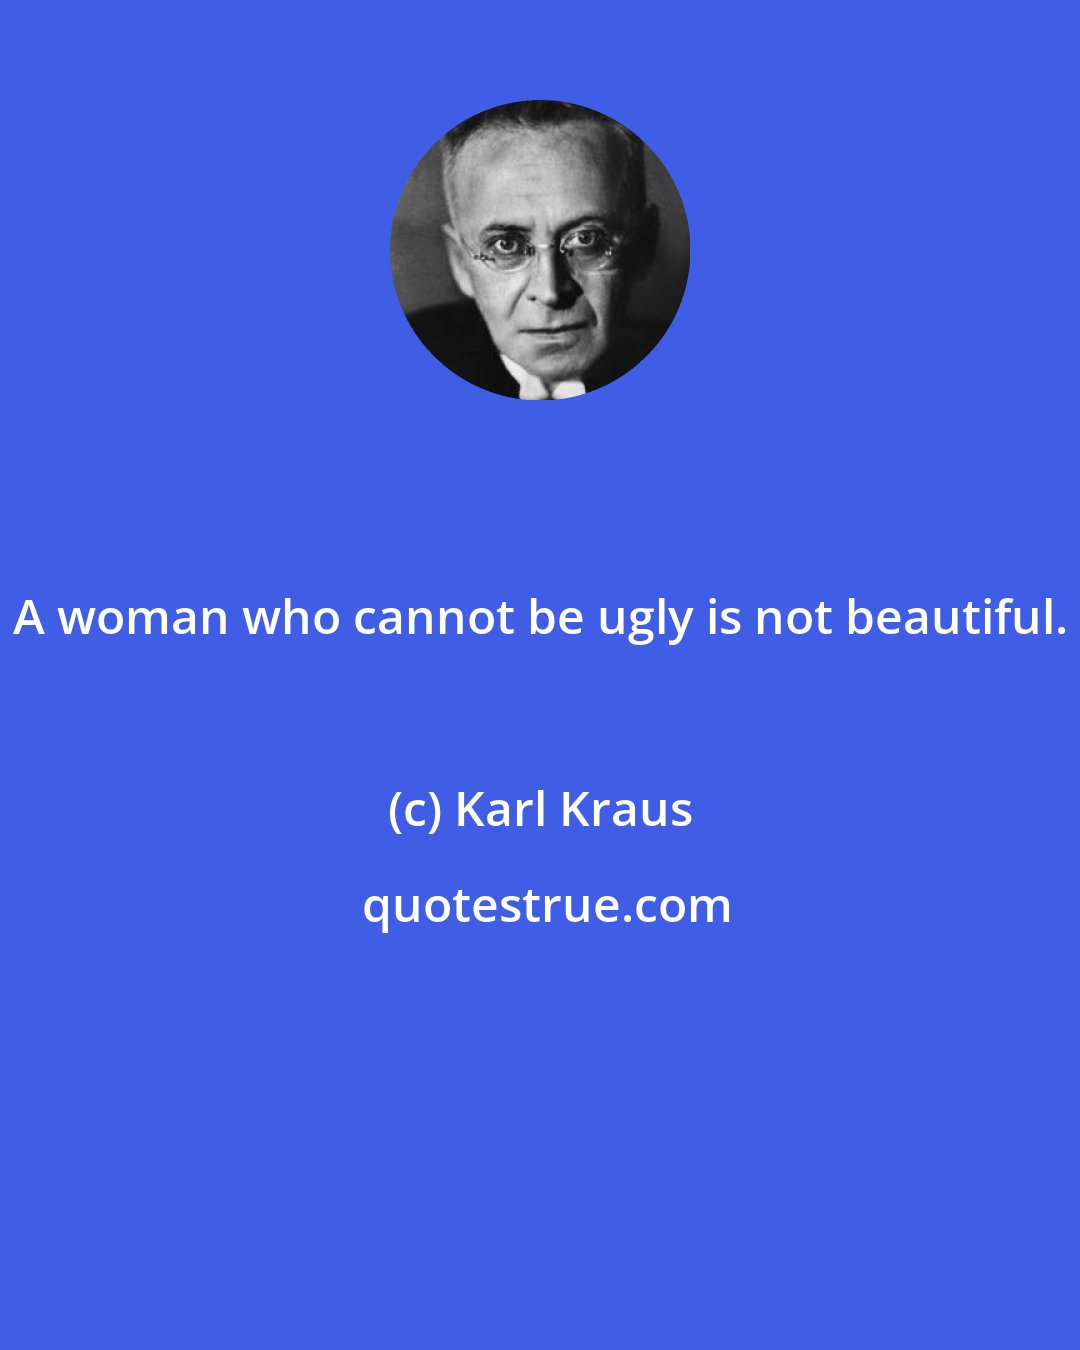 Karl Kraus: A woman who cannot be ugly is not beautiful.